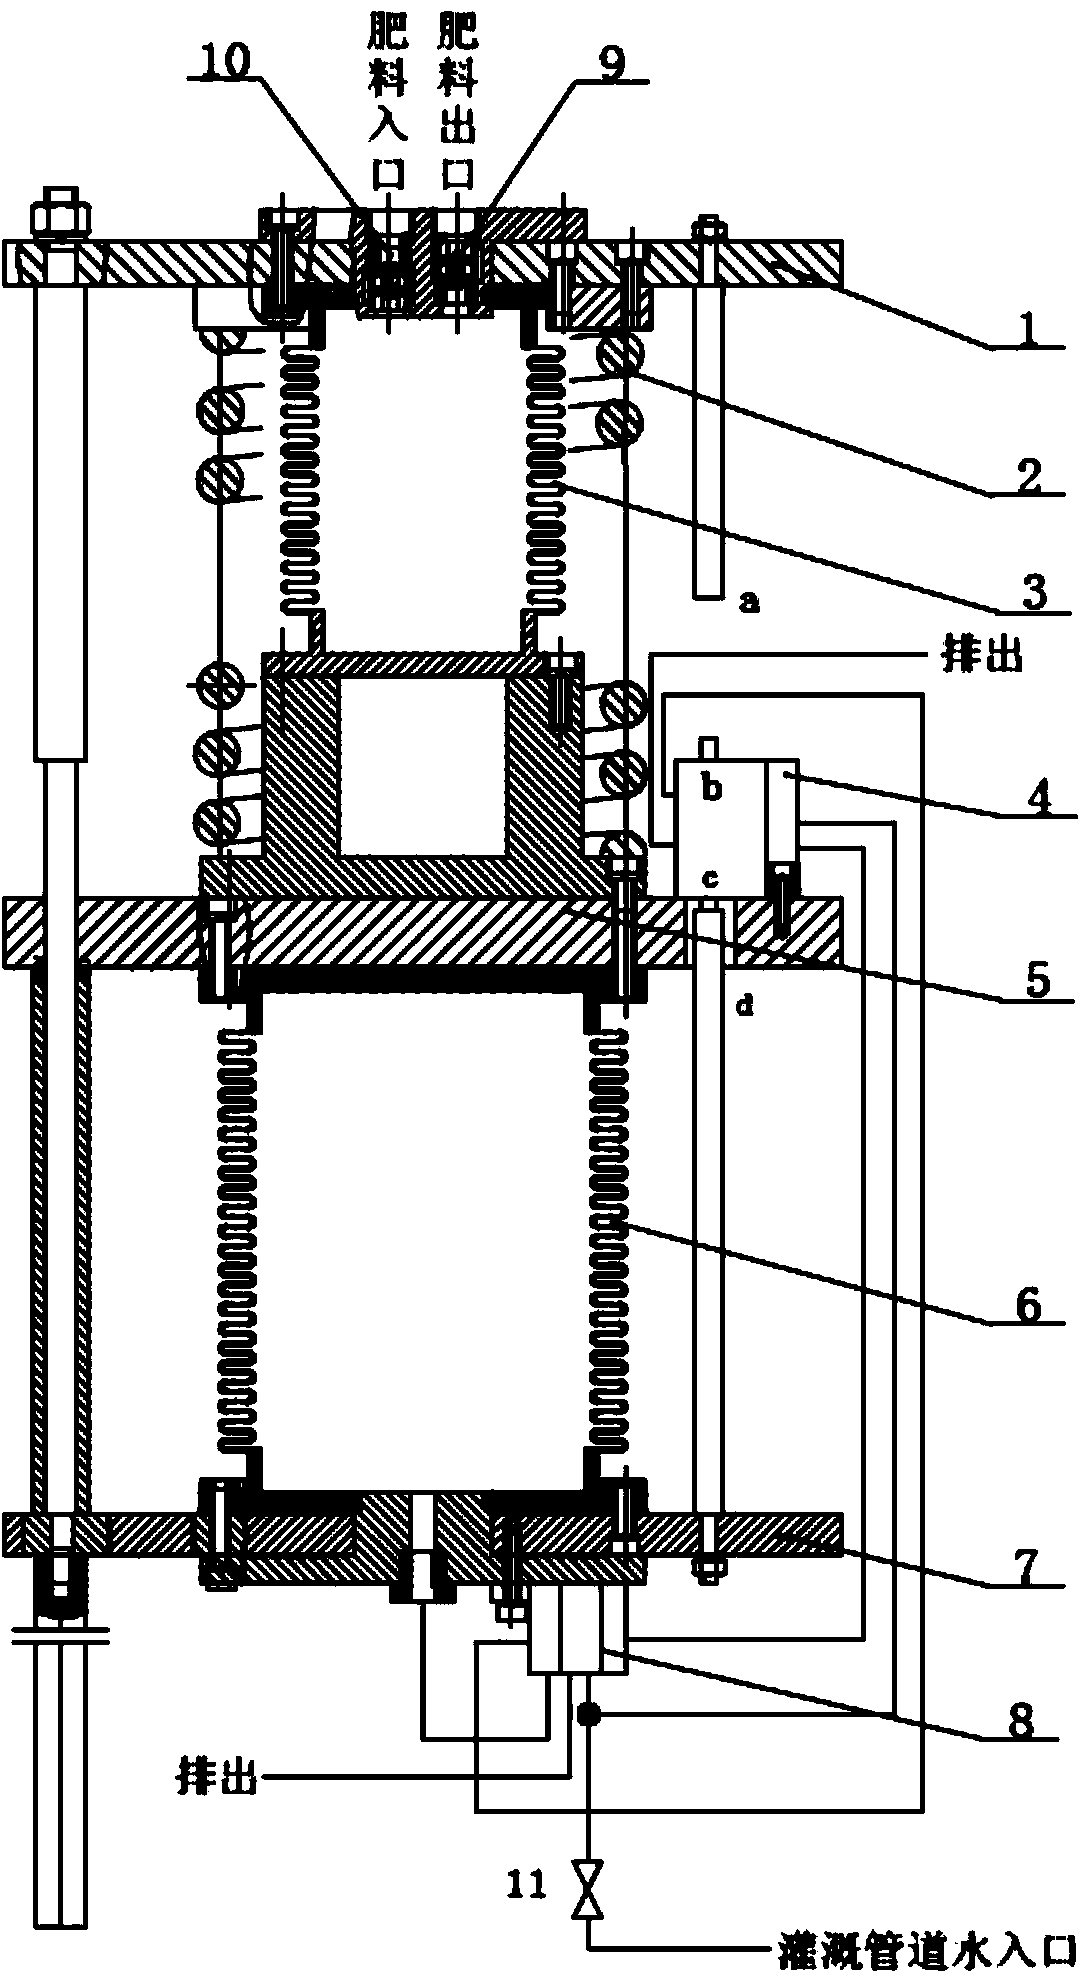 Full-hydrodynamic automatically-controlled supercharged fertilizer apparatus